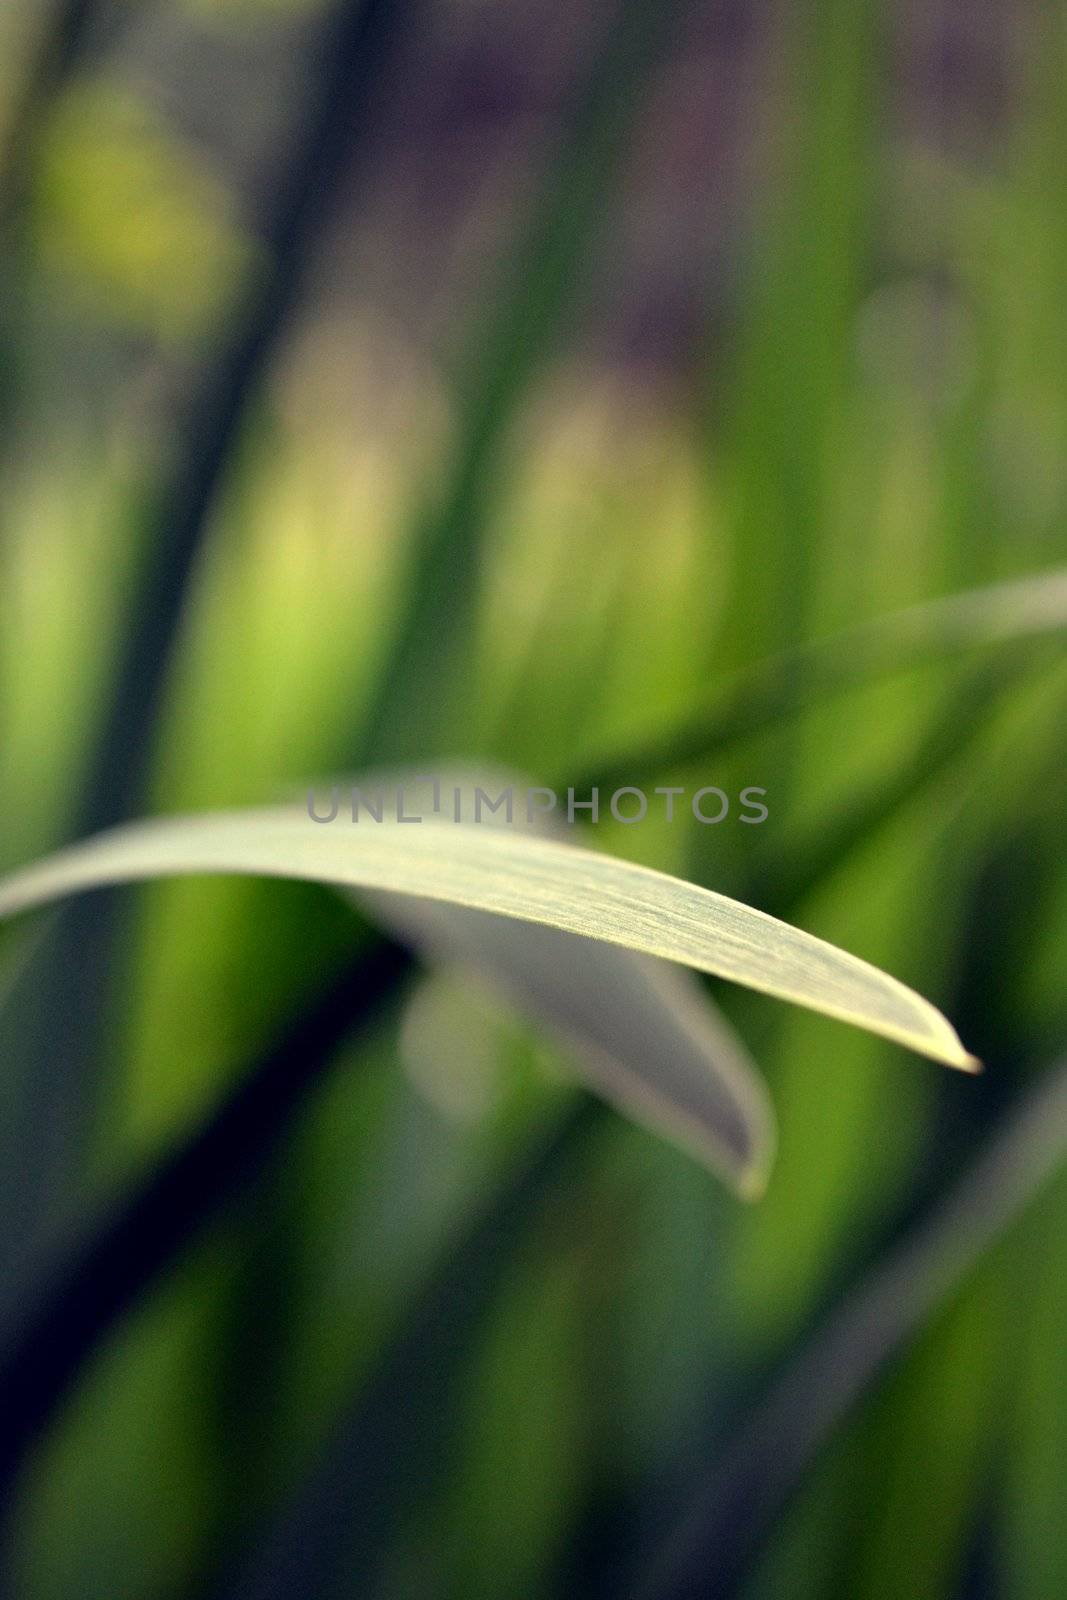 Green grass leaf over other blur green leafs